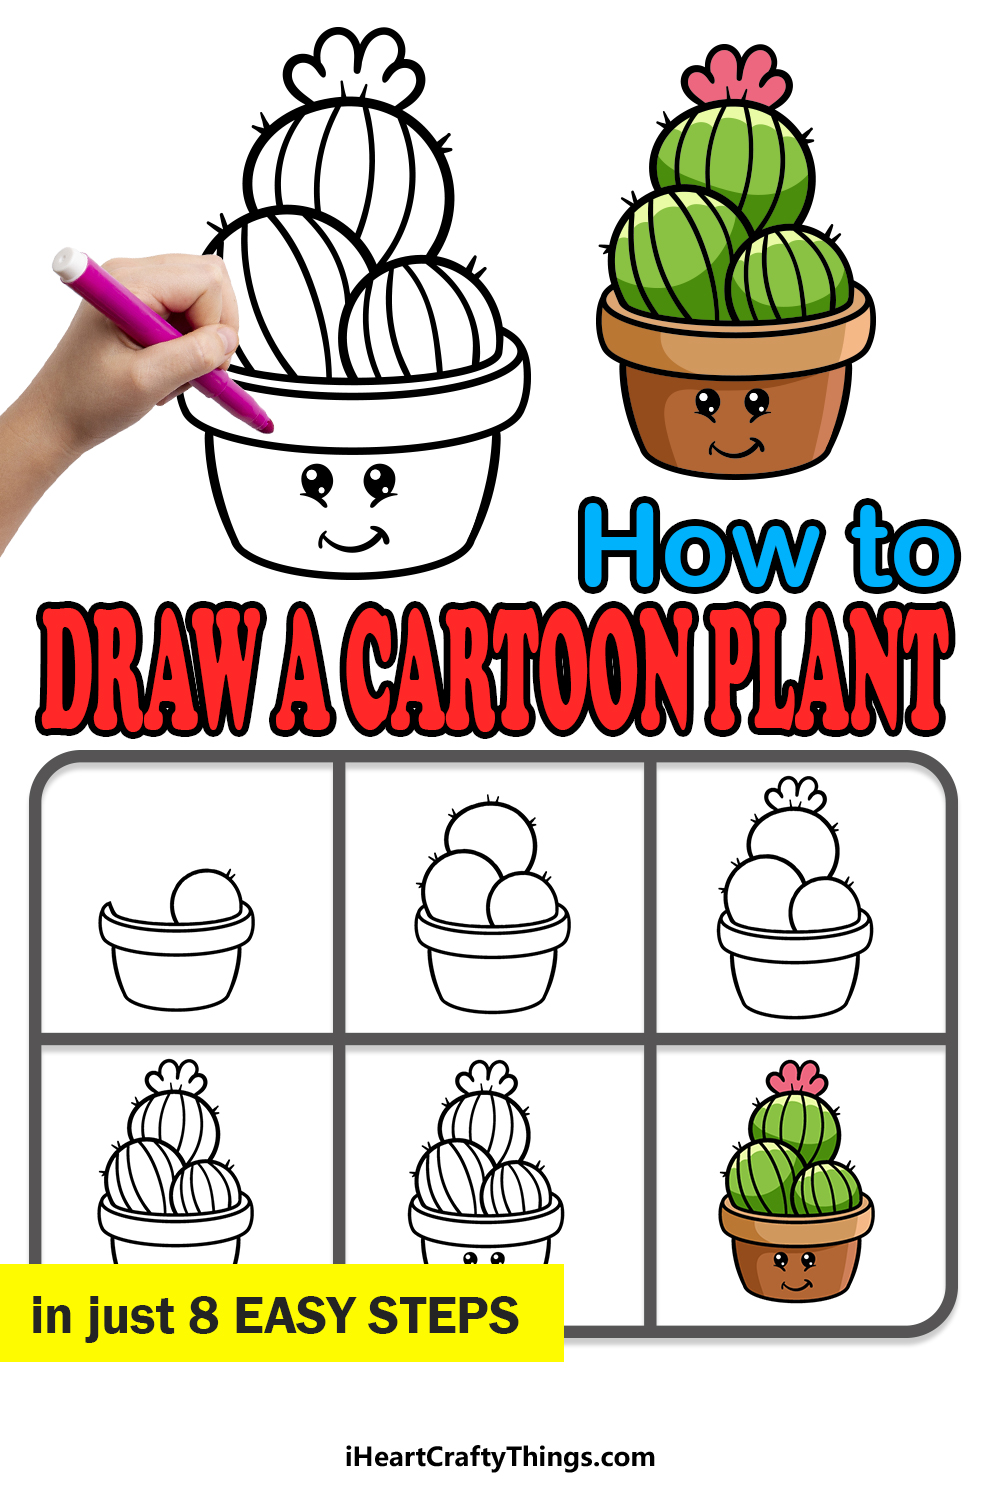 how to draw a cartoon plant in 8 easy steps